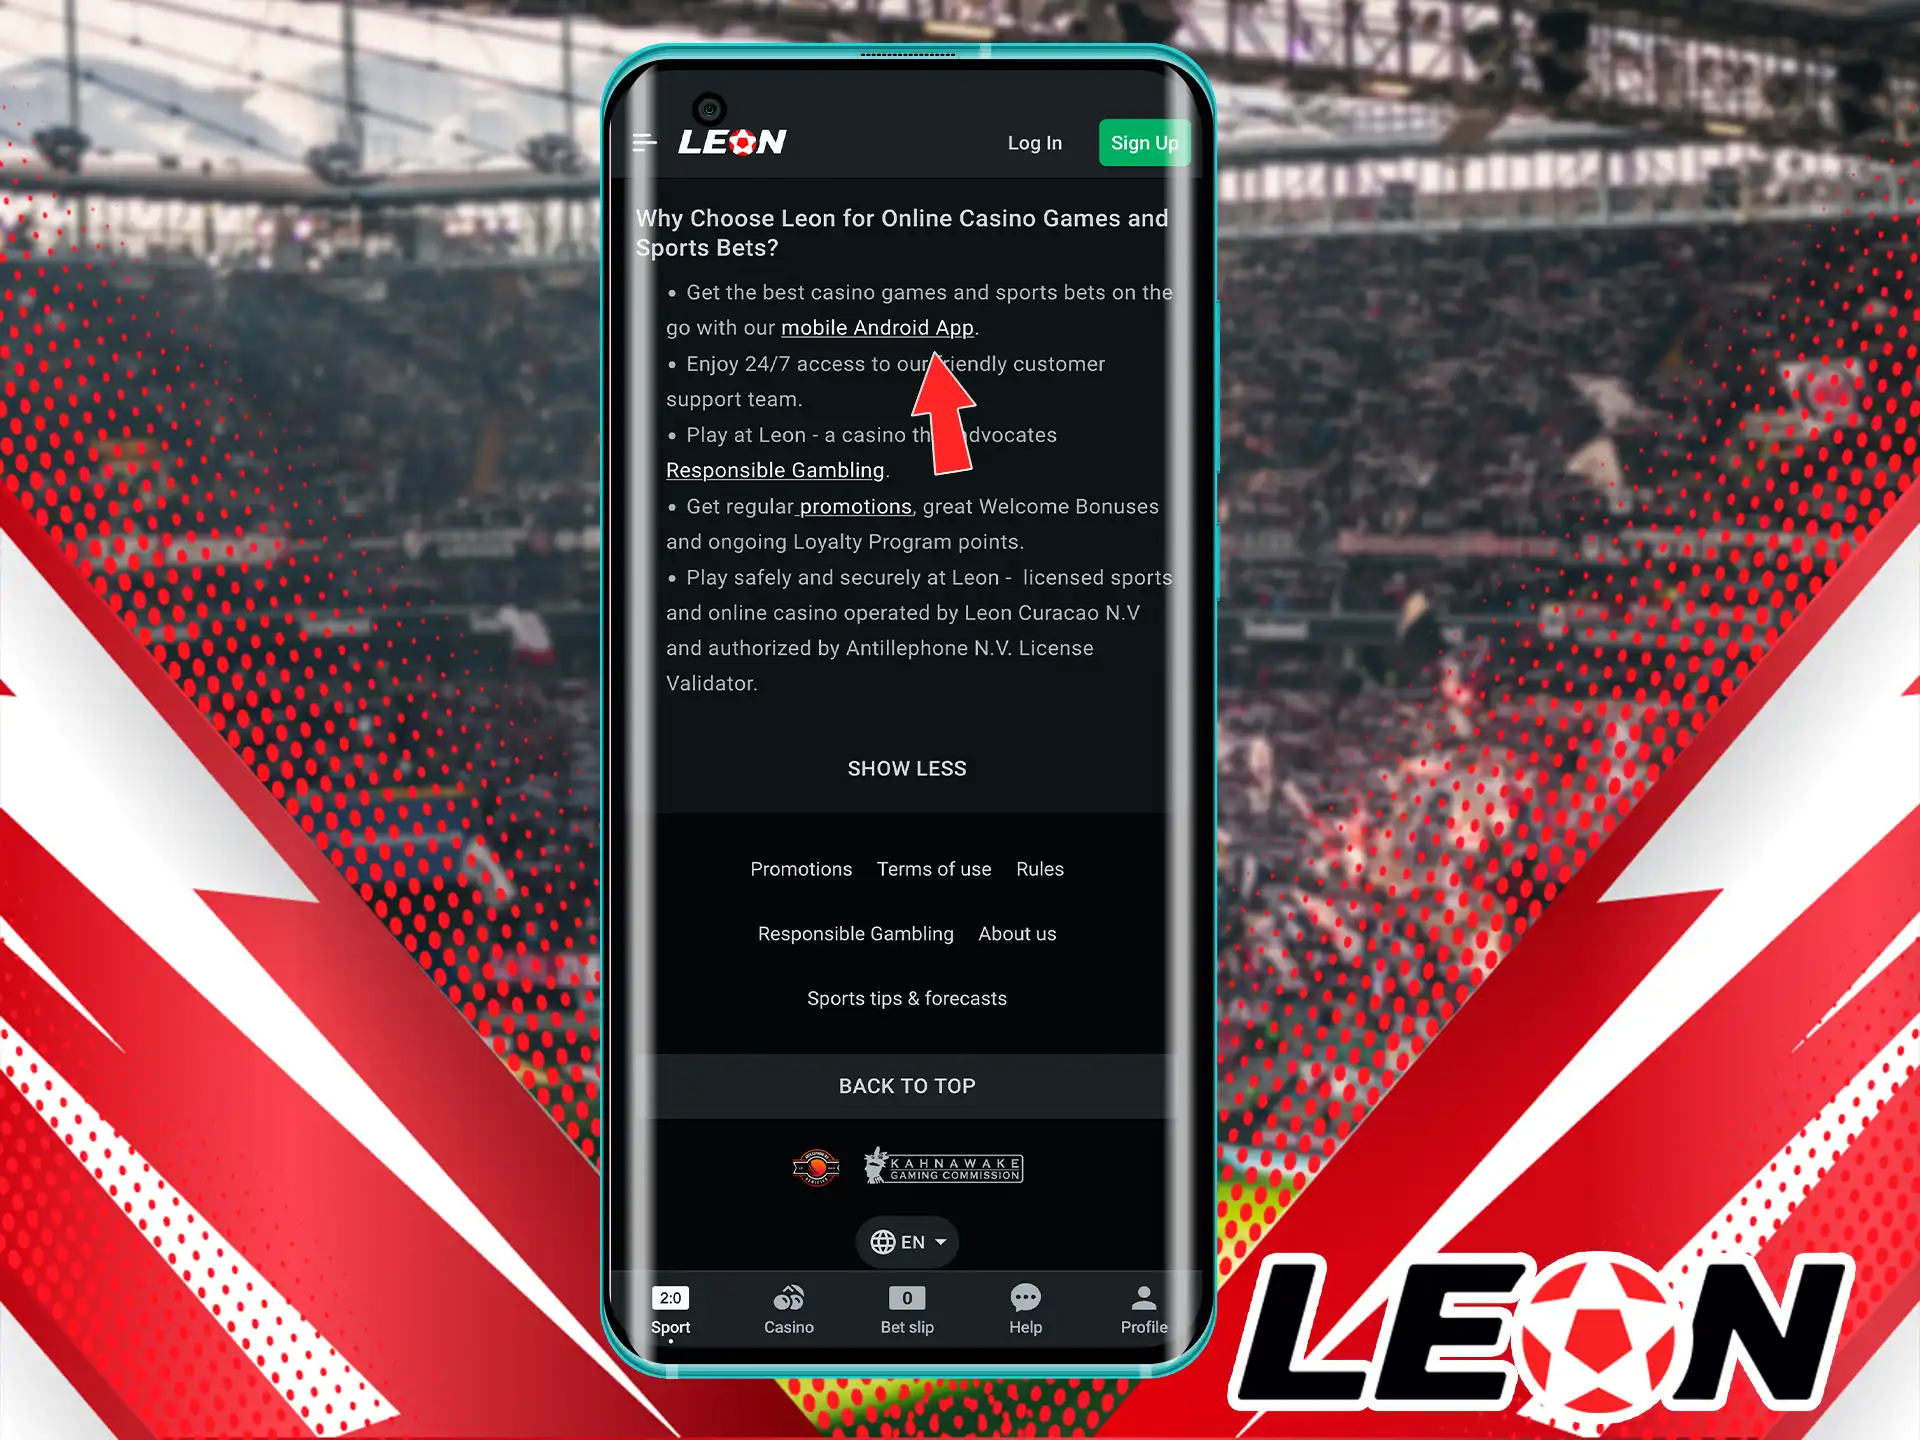 If you don't know where to start the process of getting the official Leon Bet software for Android, just follow the link in the header and download the necessary files.